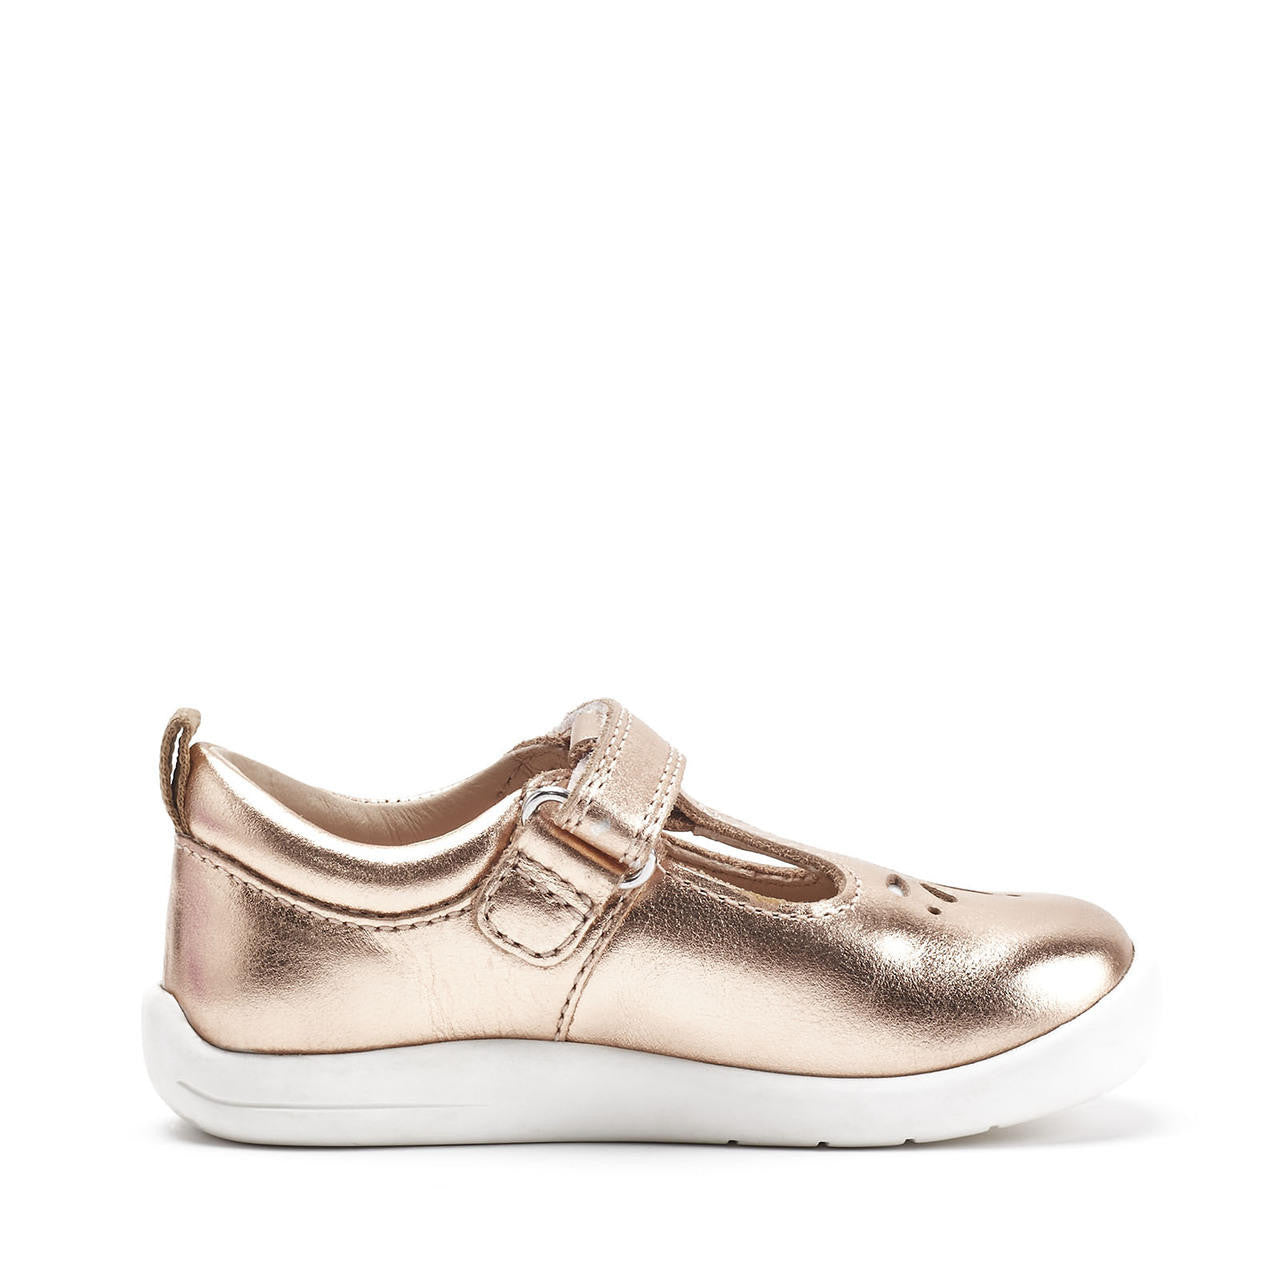 A girls T-Bar shoe by Start- Rite, style Puzzle, in Rose Gold leather with Velcro fastening.. Left side view.